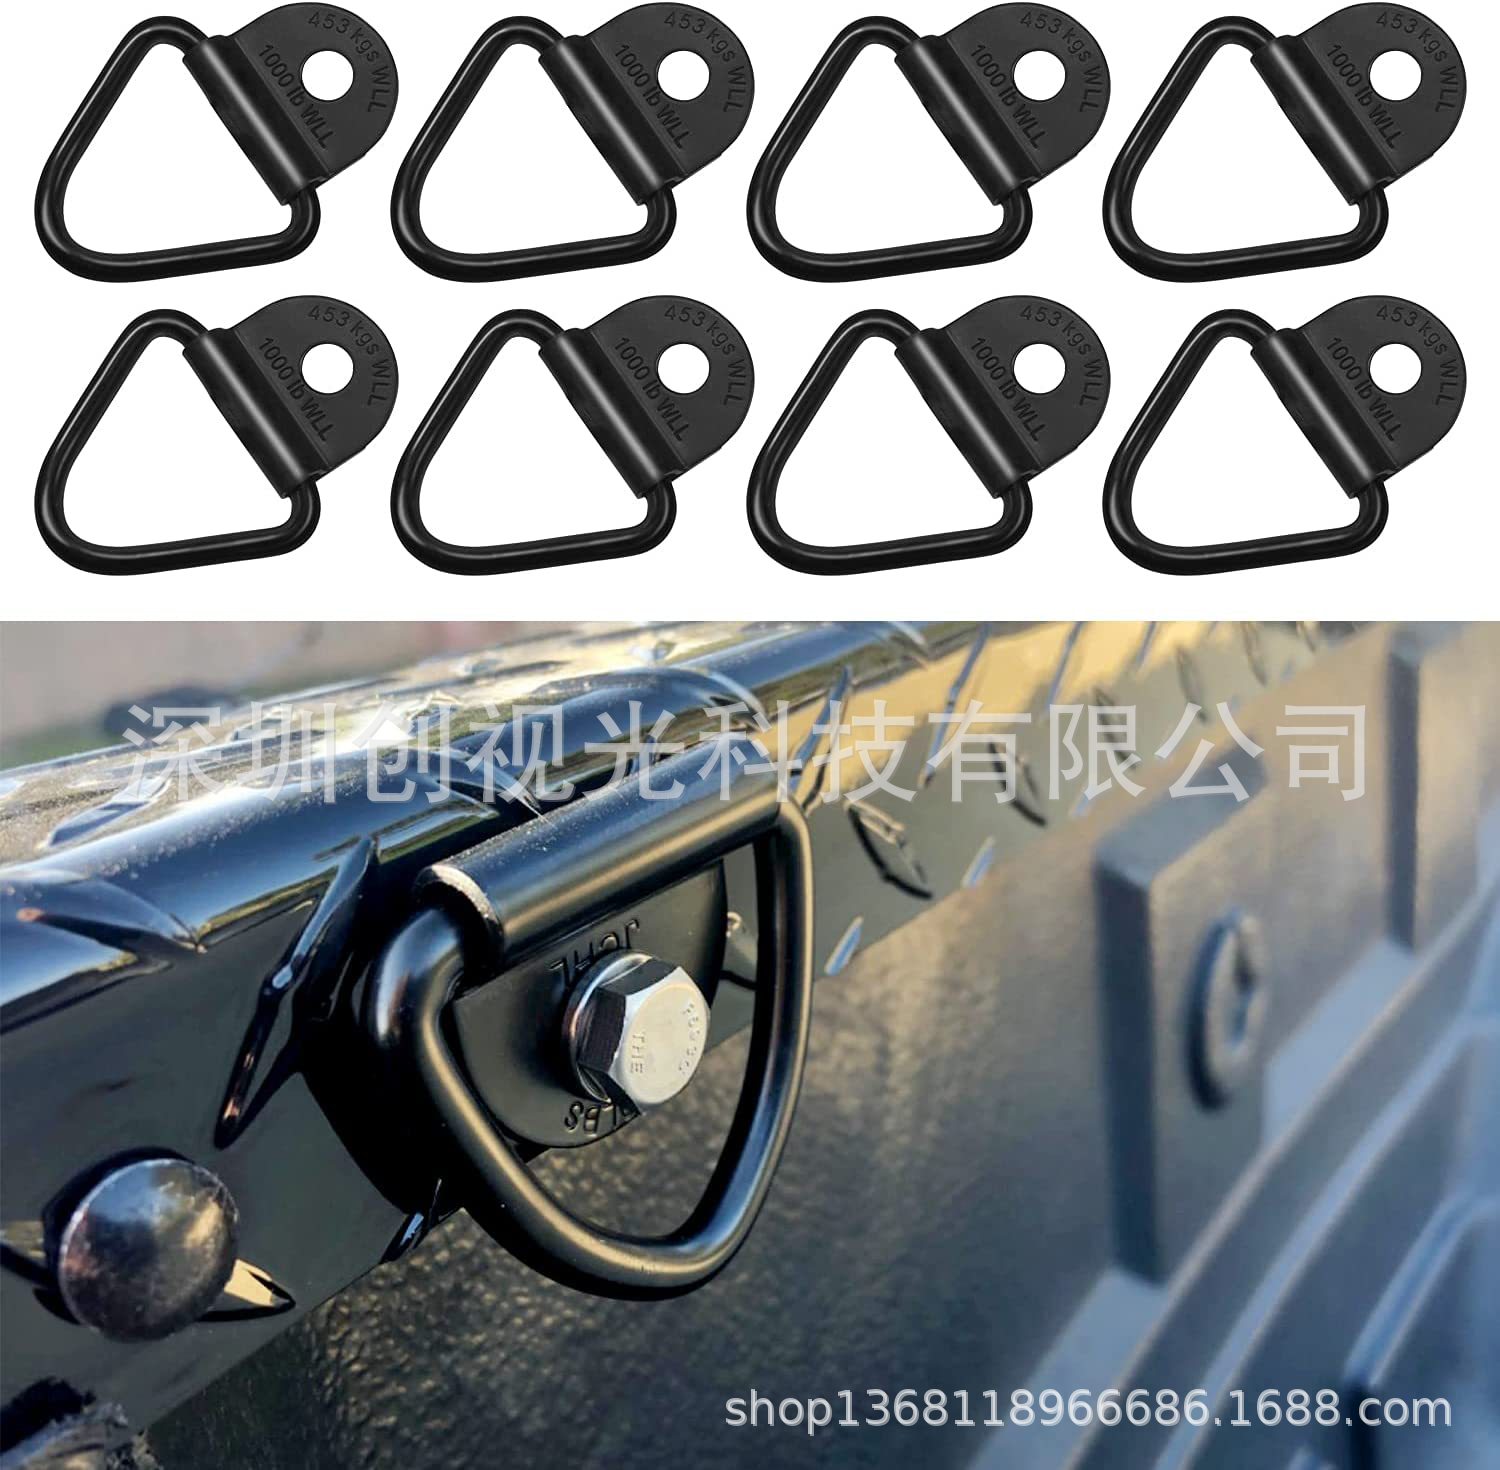  multi-function hook for off-road vehicle V-shaped metal fixed trunk hook fastening anchor 4-10 pack inquiry